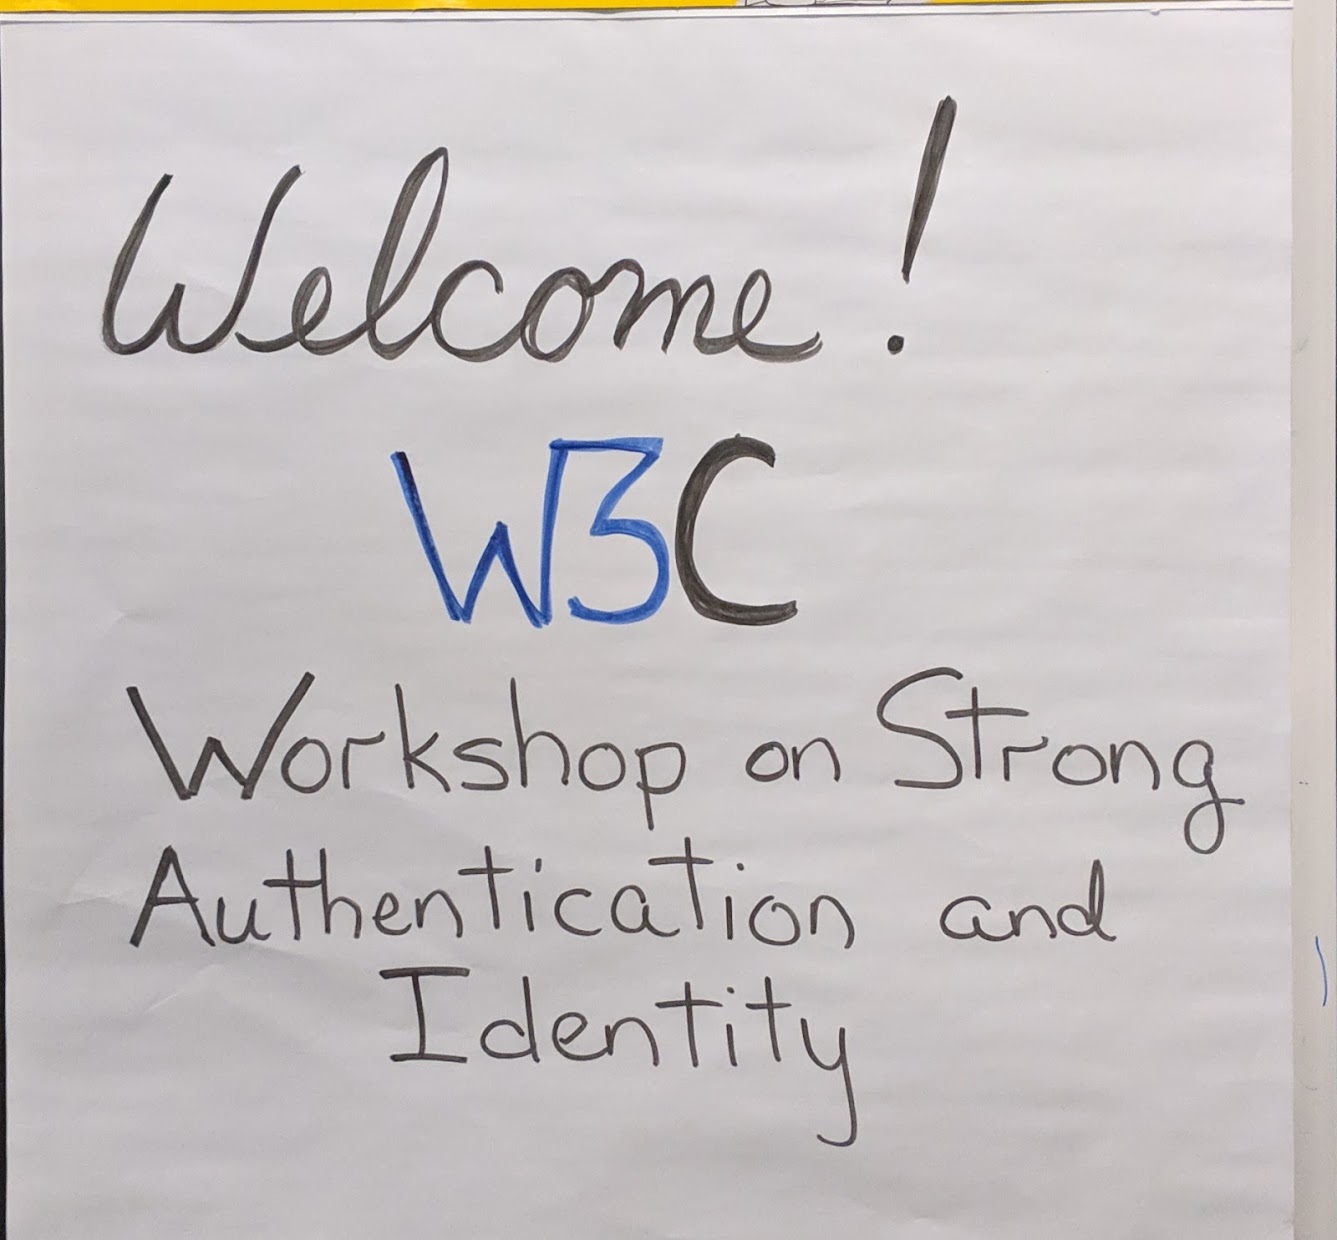 Welcome! W3C Workshop on Strong Authentication and Identity